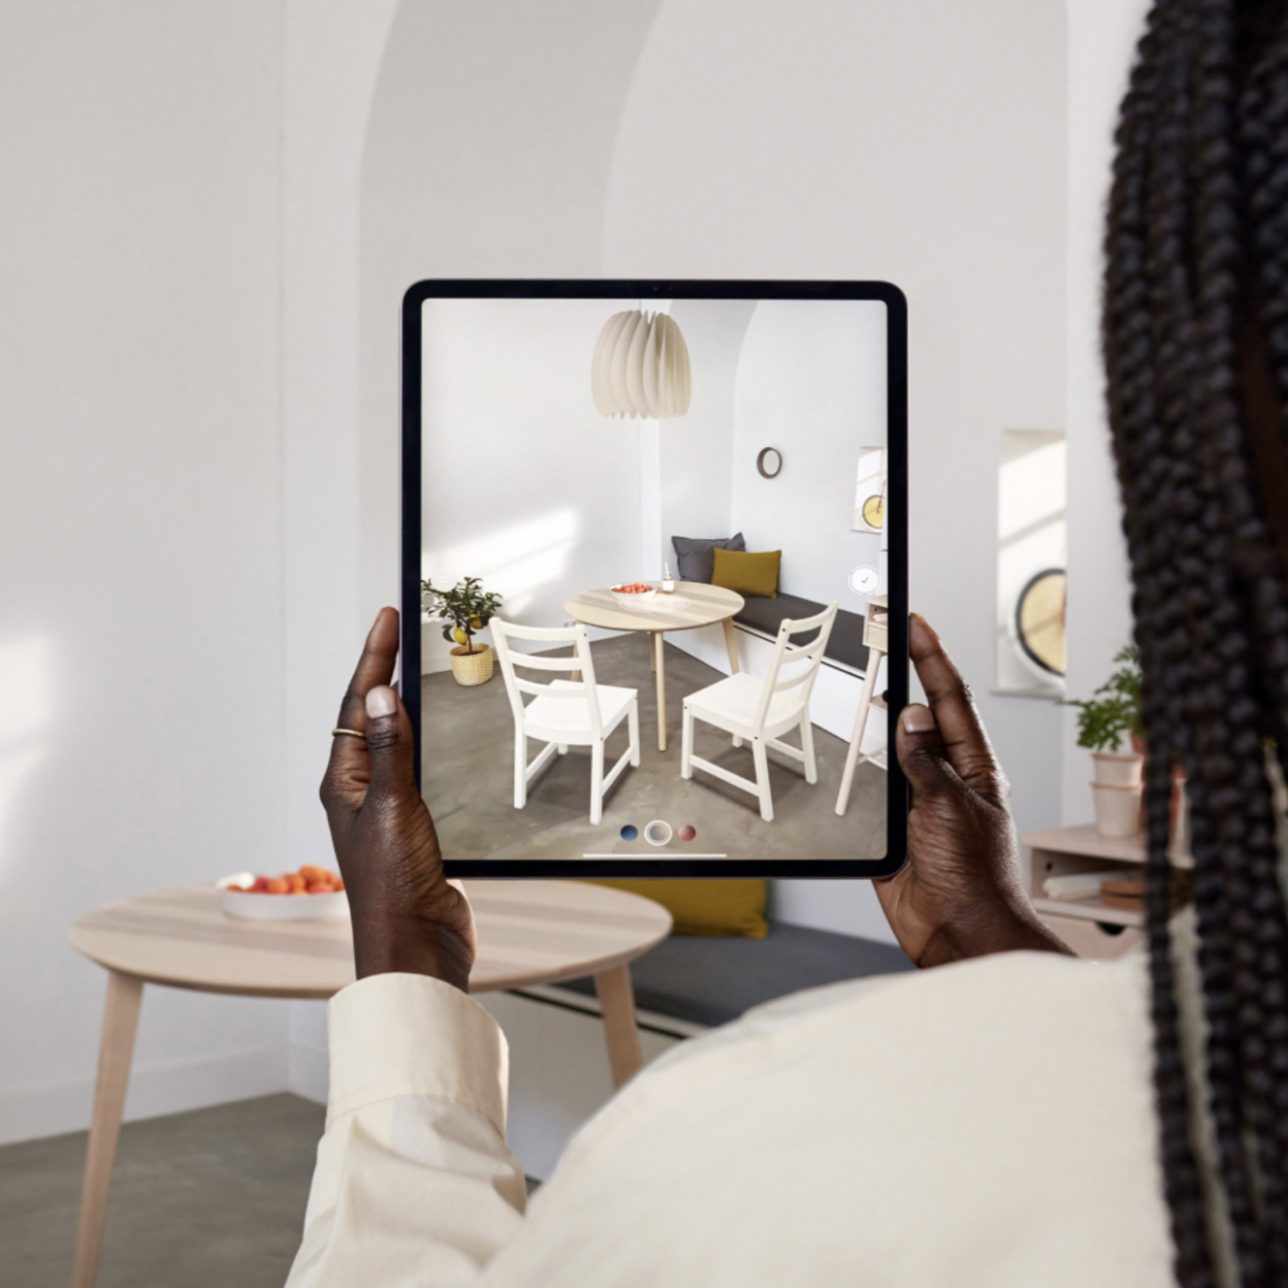 Top tips for integrating AR